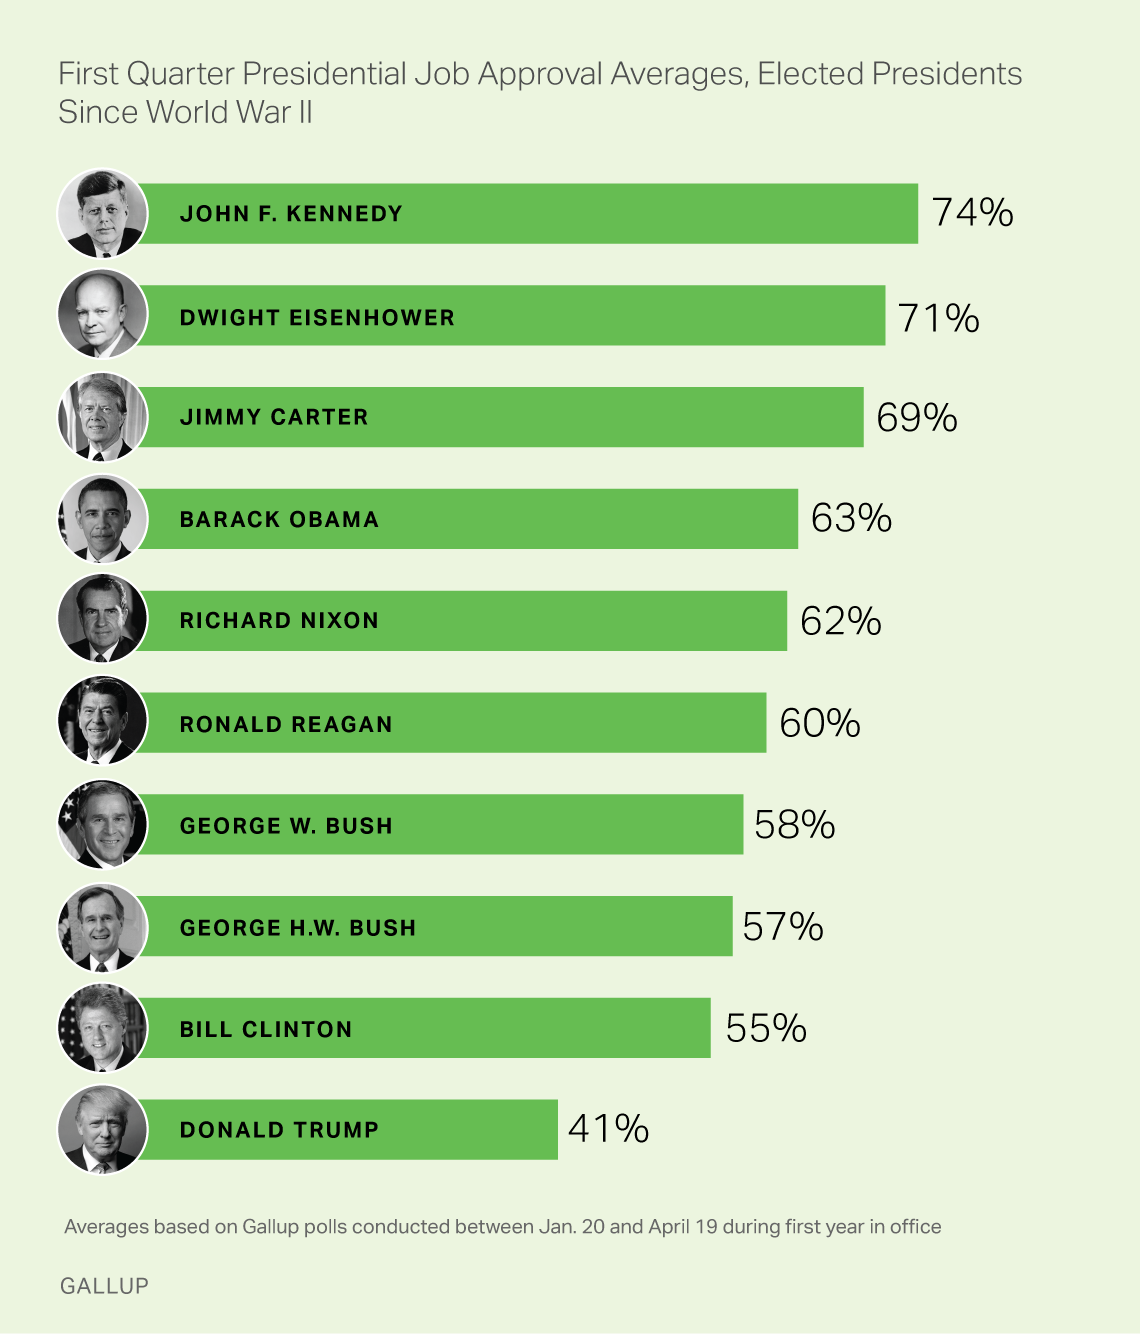 First Quarter Presidential Job Approval Averages, Elected Presidents Since World War II